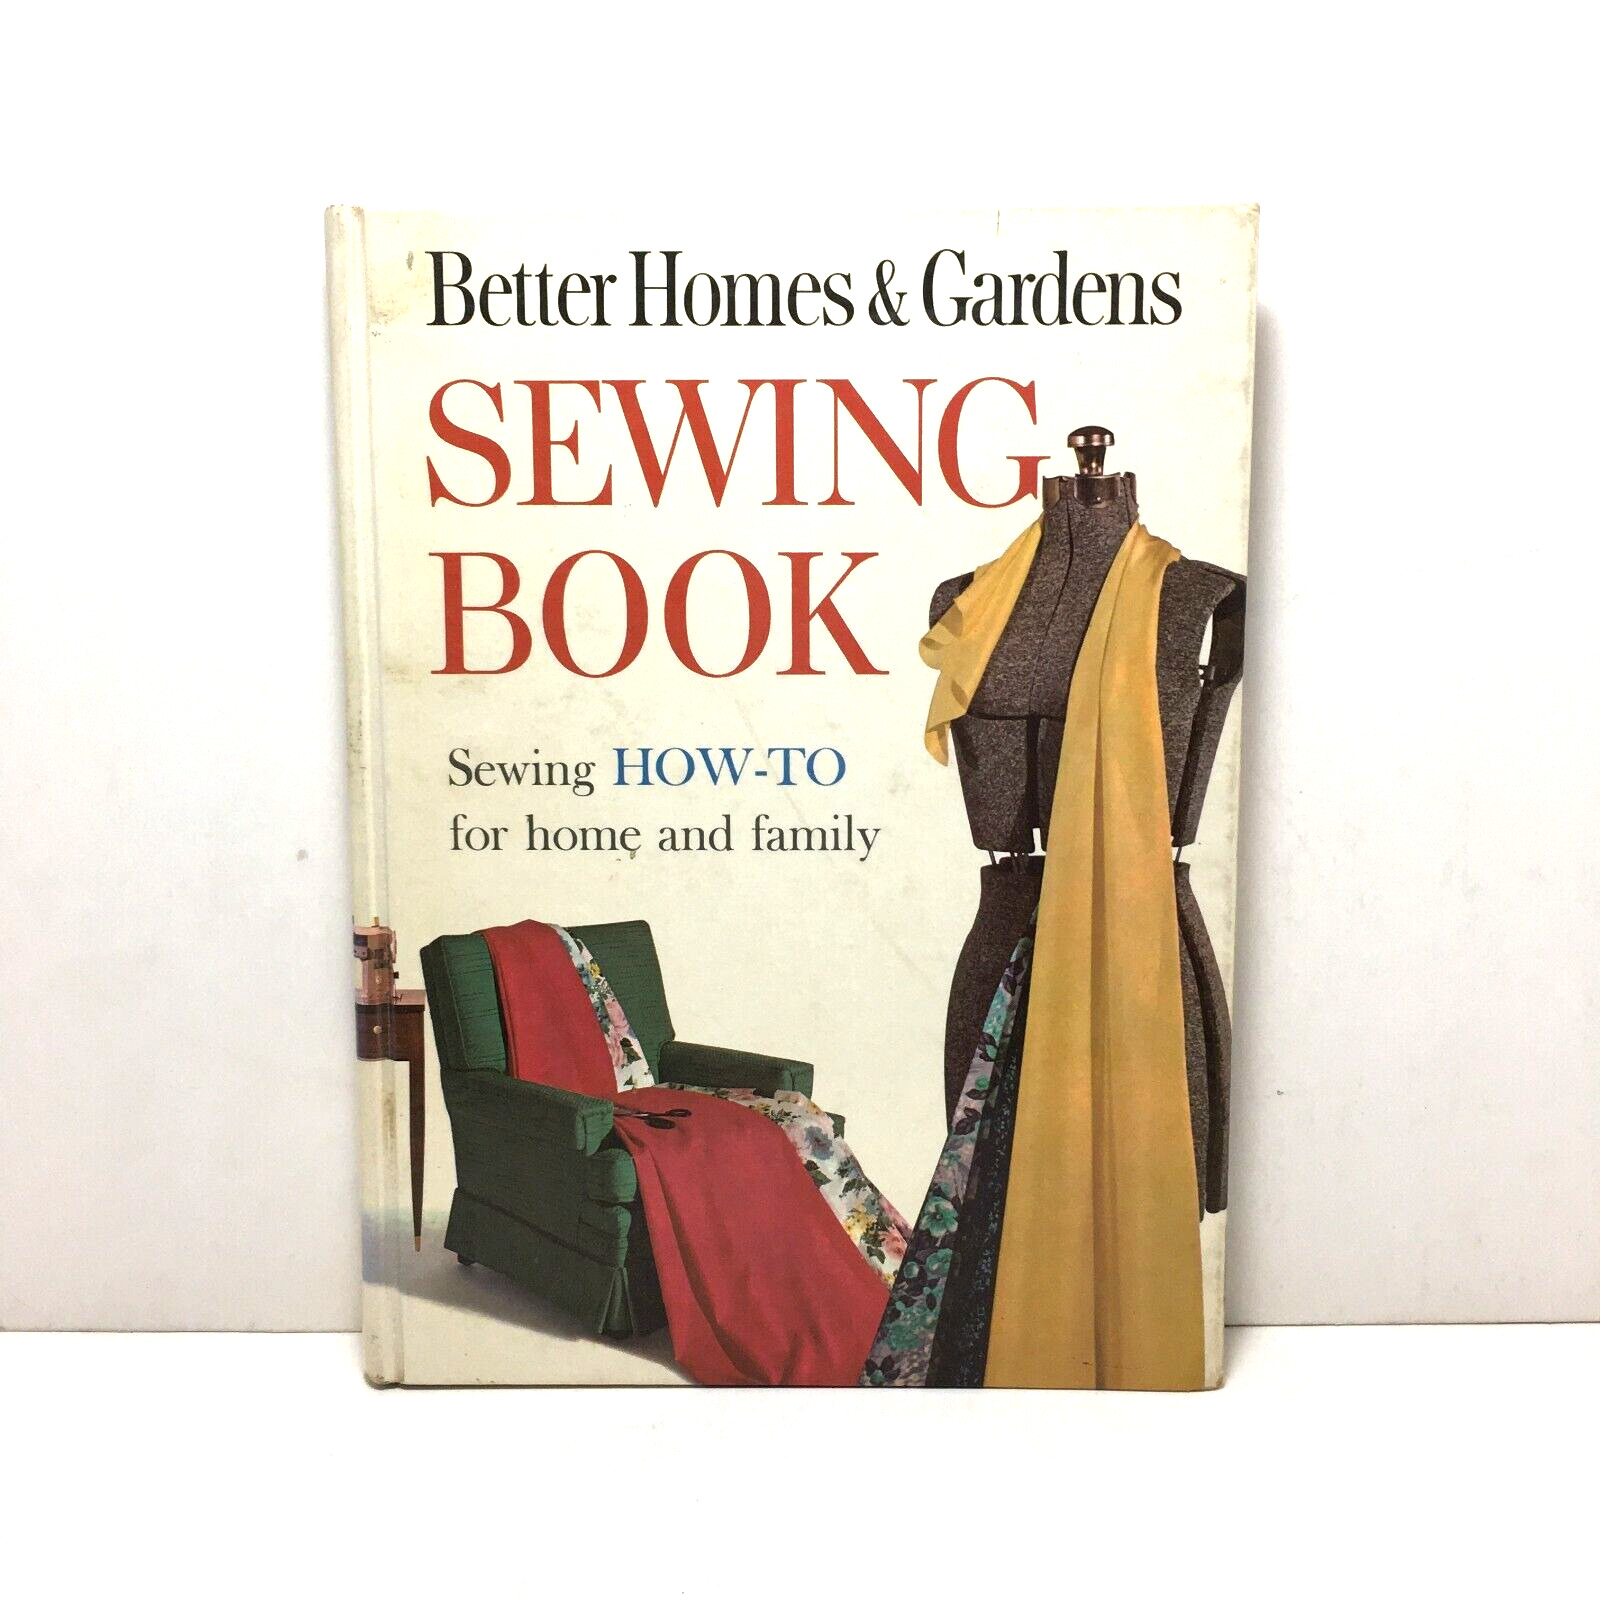 Sewing Book by Better Homes & Gardens 1961 how-to for home and family